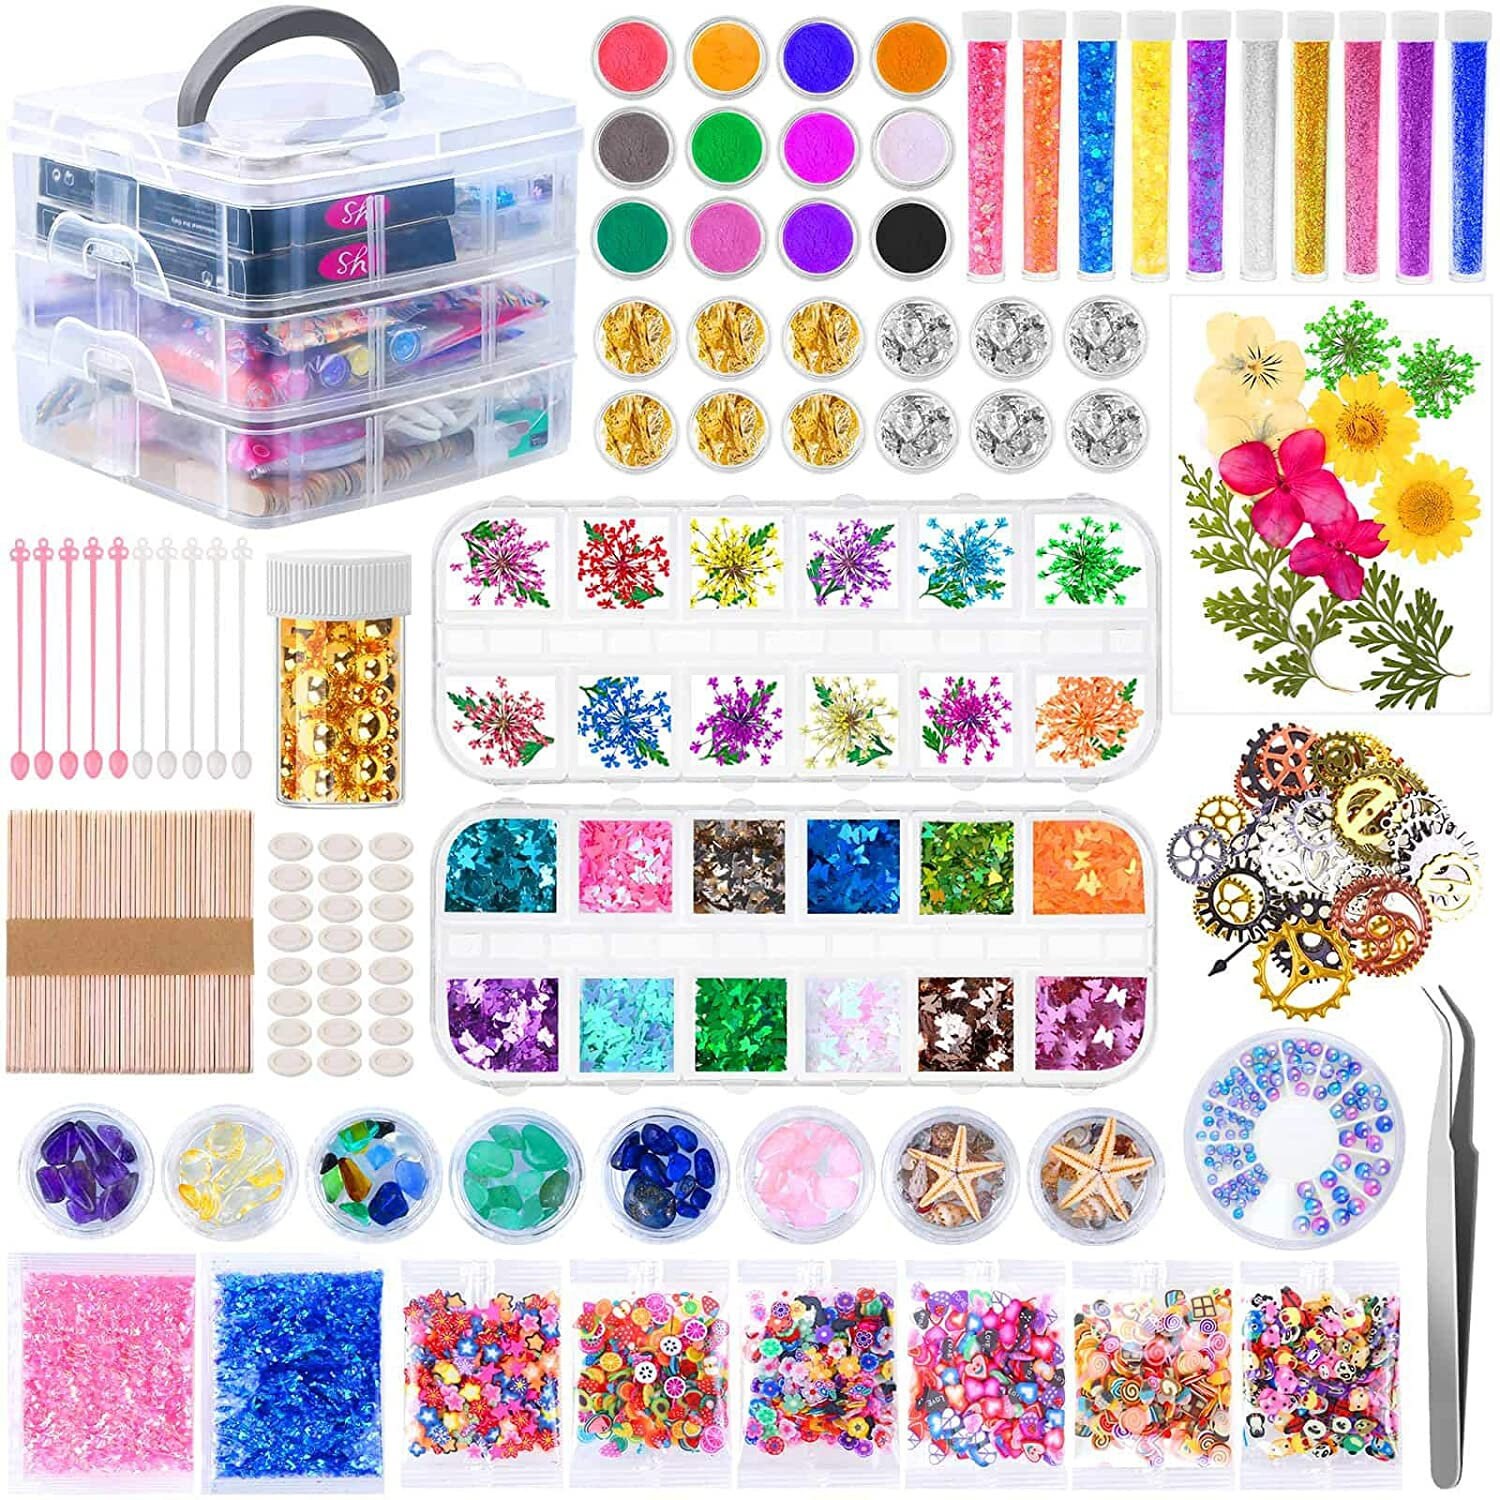 Real Dried Flower, Floral Kit for DIY Resin Jewelry – IntoResin